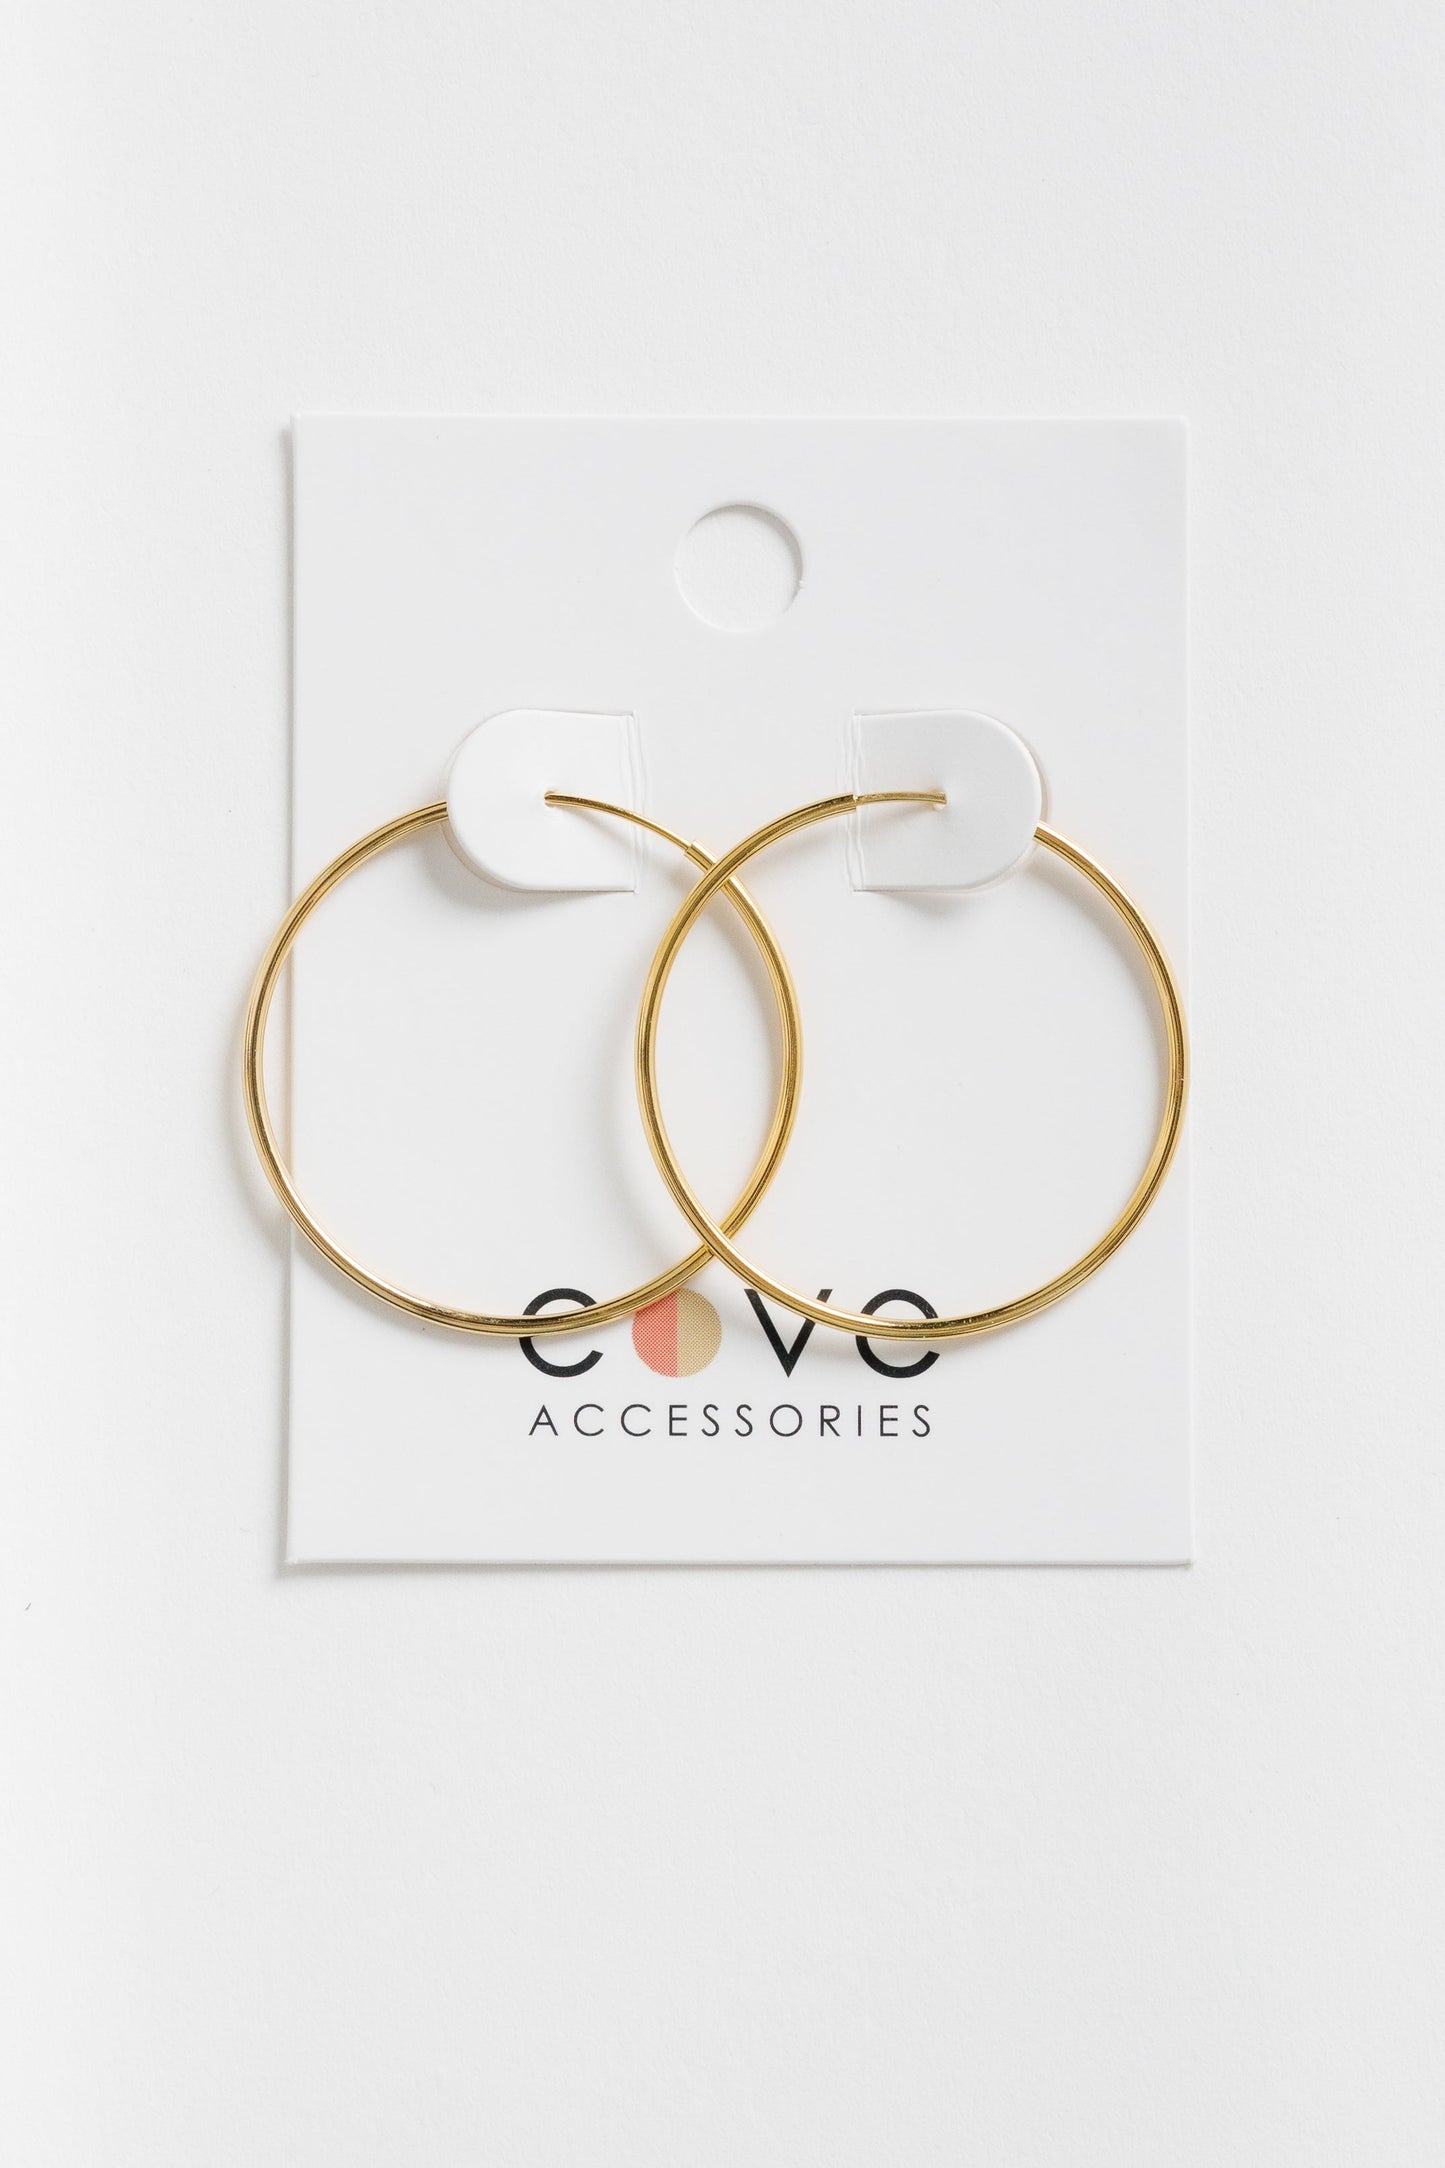 Cove Everyday Hoops WOMEN'S EARINGS Cove Accessories Gold 1.18" Rnd 